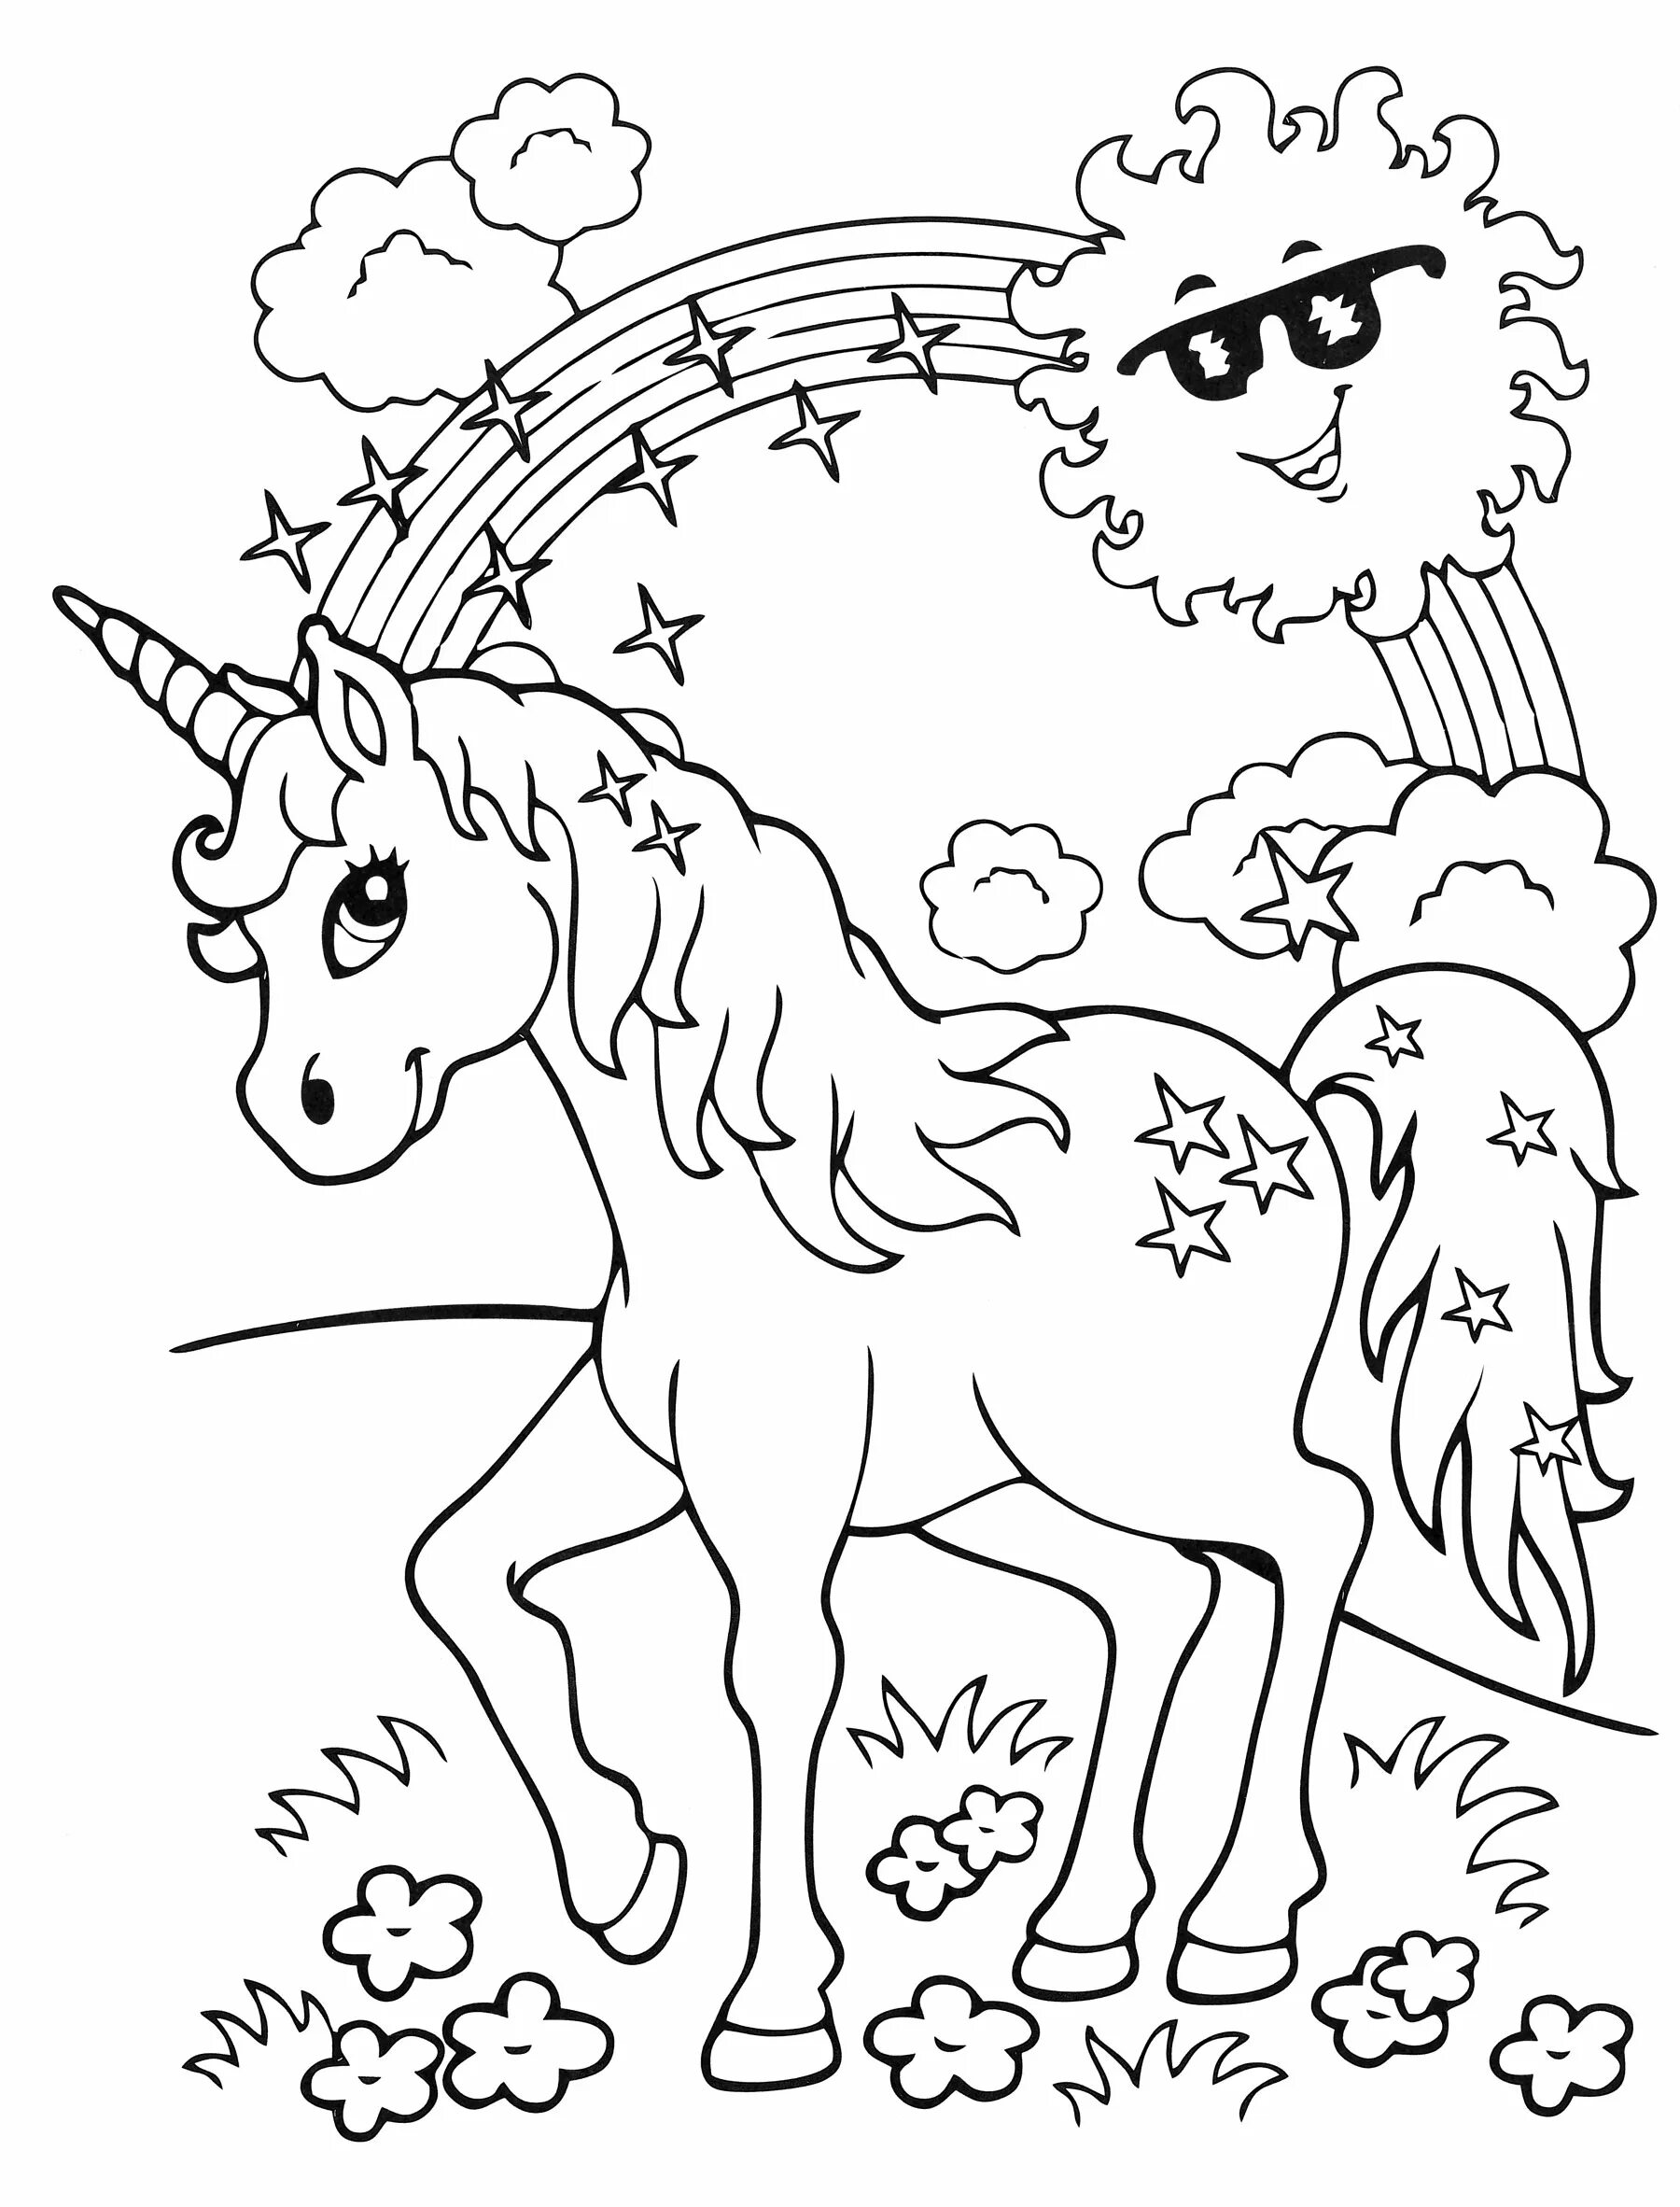 Outstanding 5-6 year old coloring book for girls unicorns